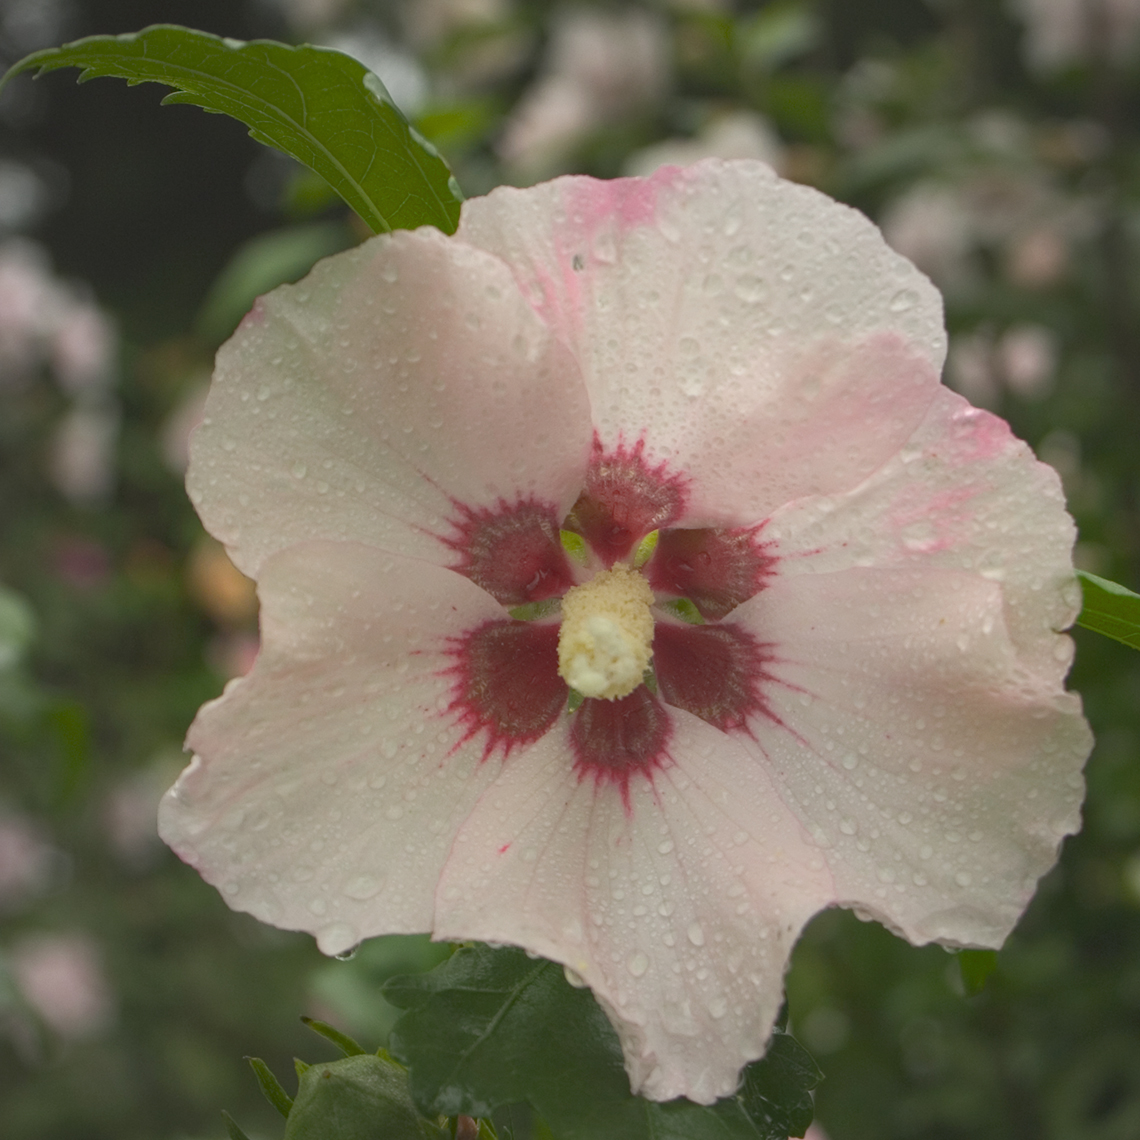 Closeup of the pale pink flower of Blush Satin rose of Sharon showing a prominent red star like marking in the center